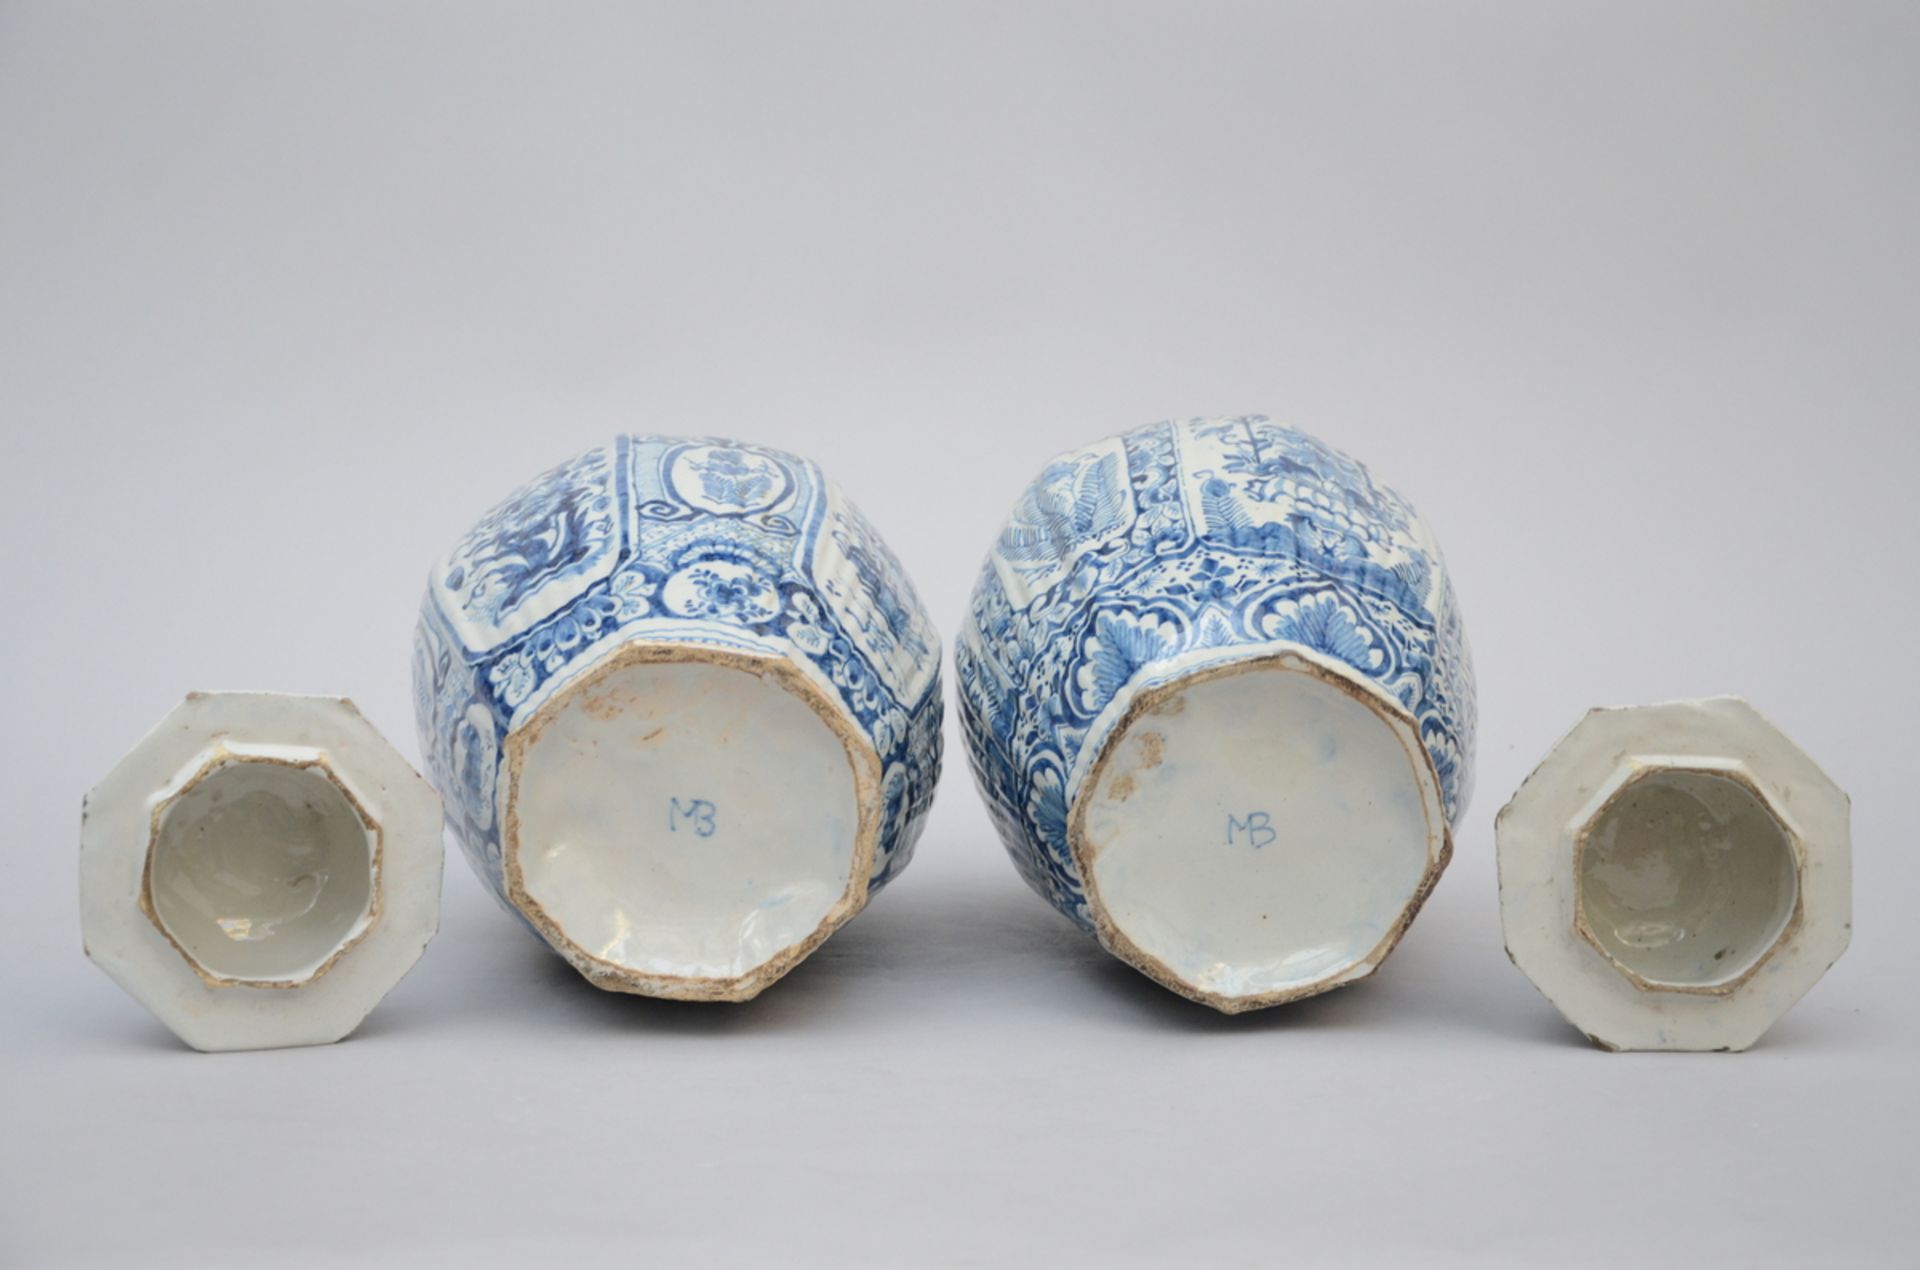 Two vases in Delft earthenware, 18th century (44 and 45 cm) (*) - Image 3 of 3